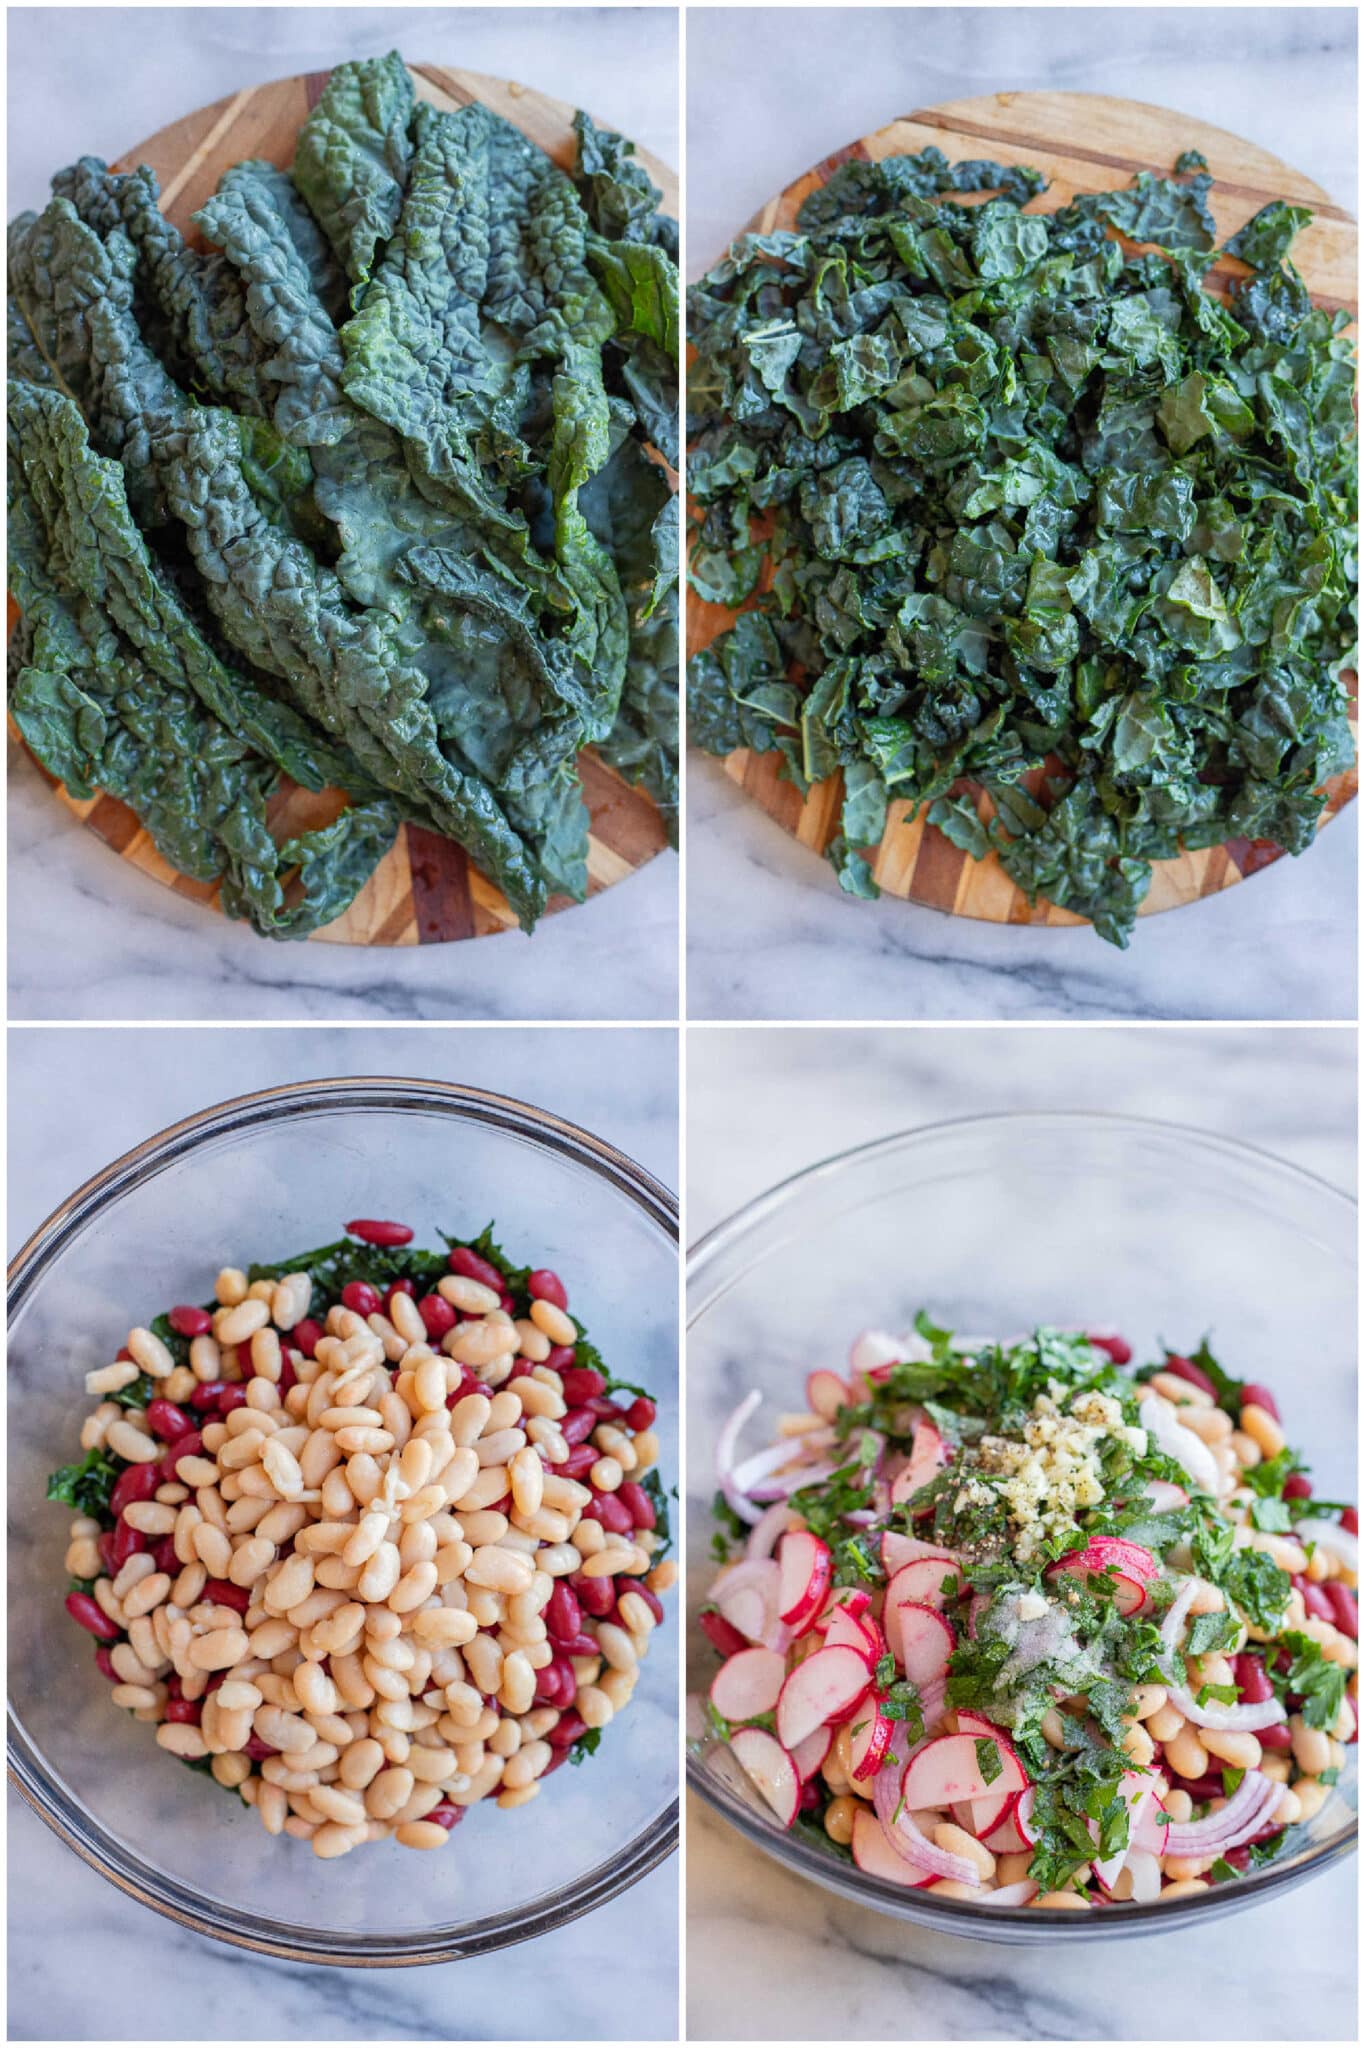 showing how to make beans and greens salad with kale, white beans, kidney beans and chickpeas